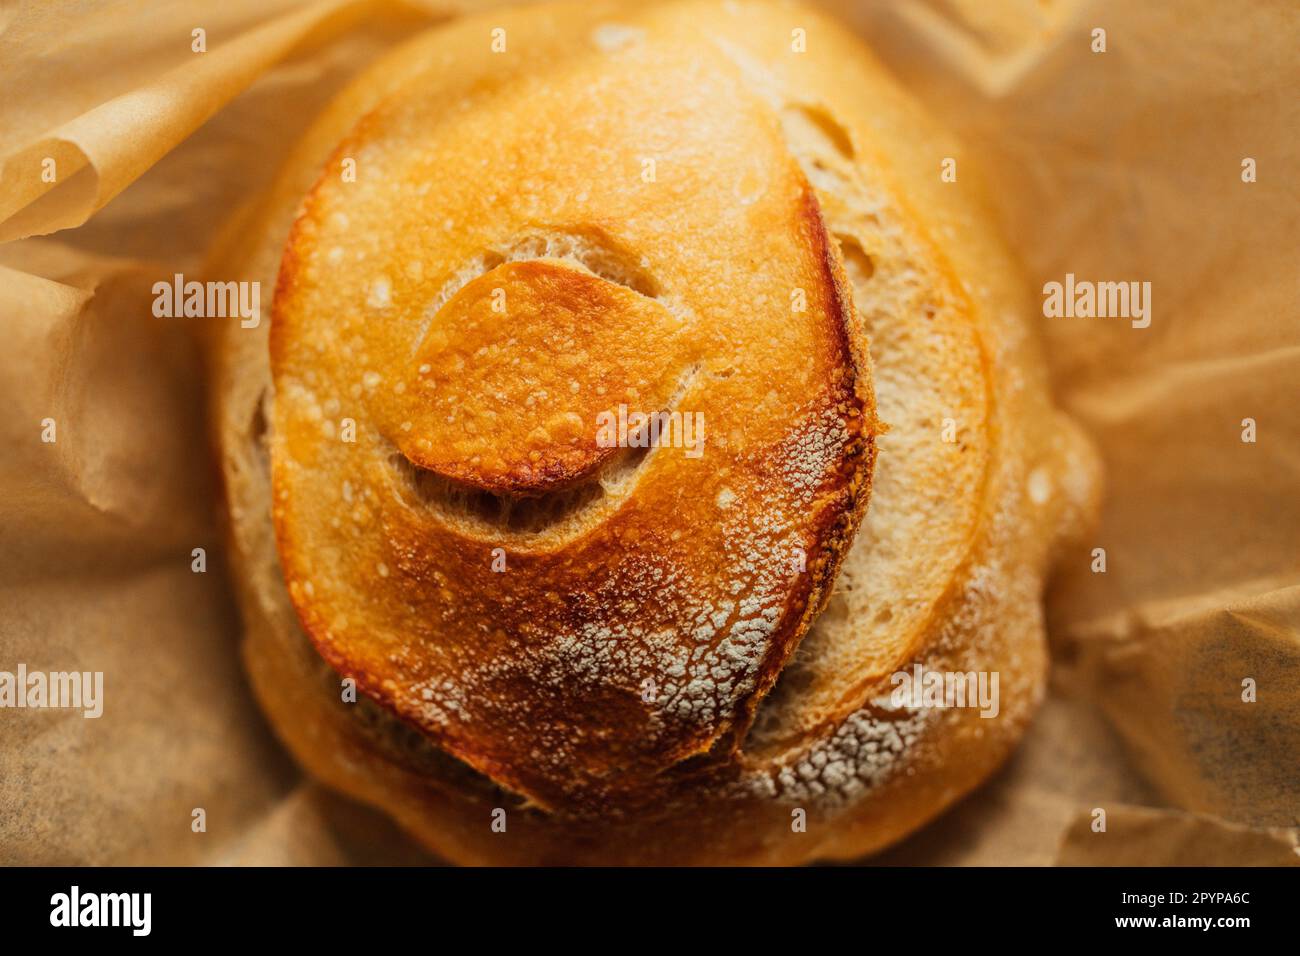 Freshly baked round loaf of homemade sourdough bread on brown parchment paper, eye design Stock Photo